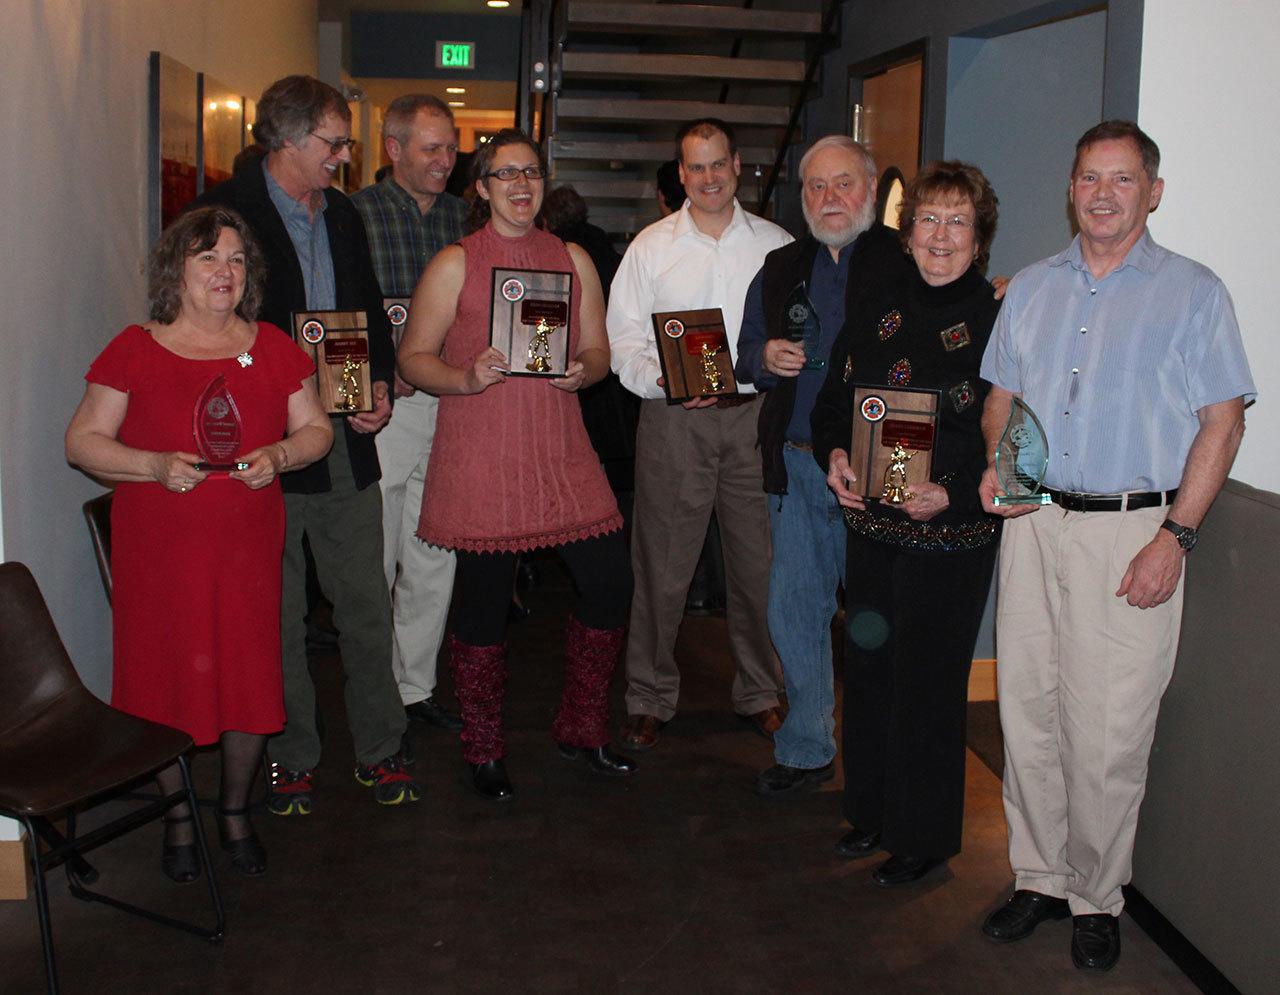 Contributed photo/Terry Sanders                                From left to right, Joan Byrne, Harry See, Mark Wagner, Erin Graham, Kyle Dodd, Ron Garner, Diane Ludeman and John McDowell